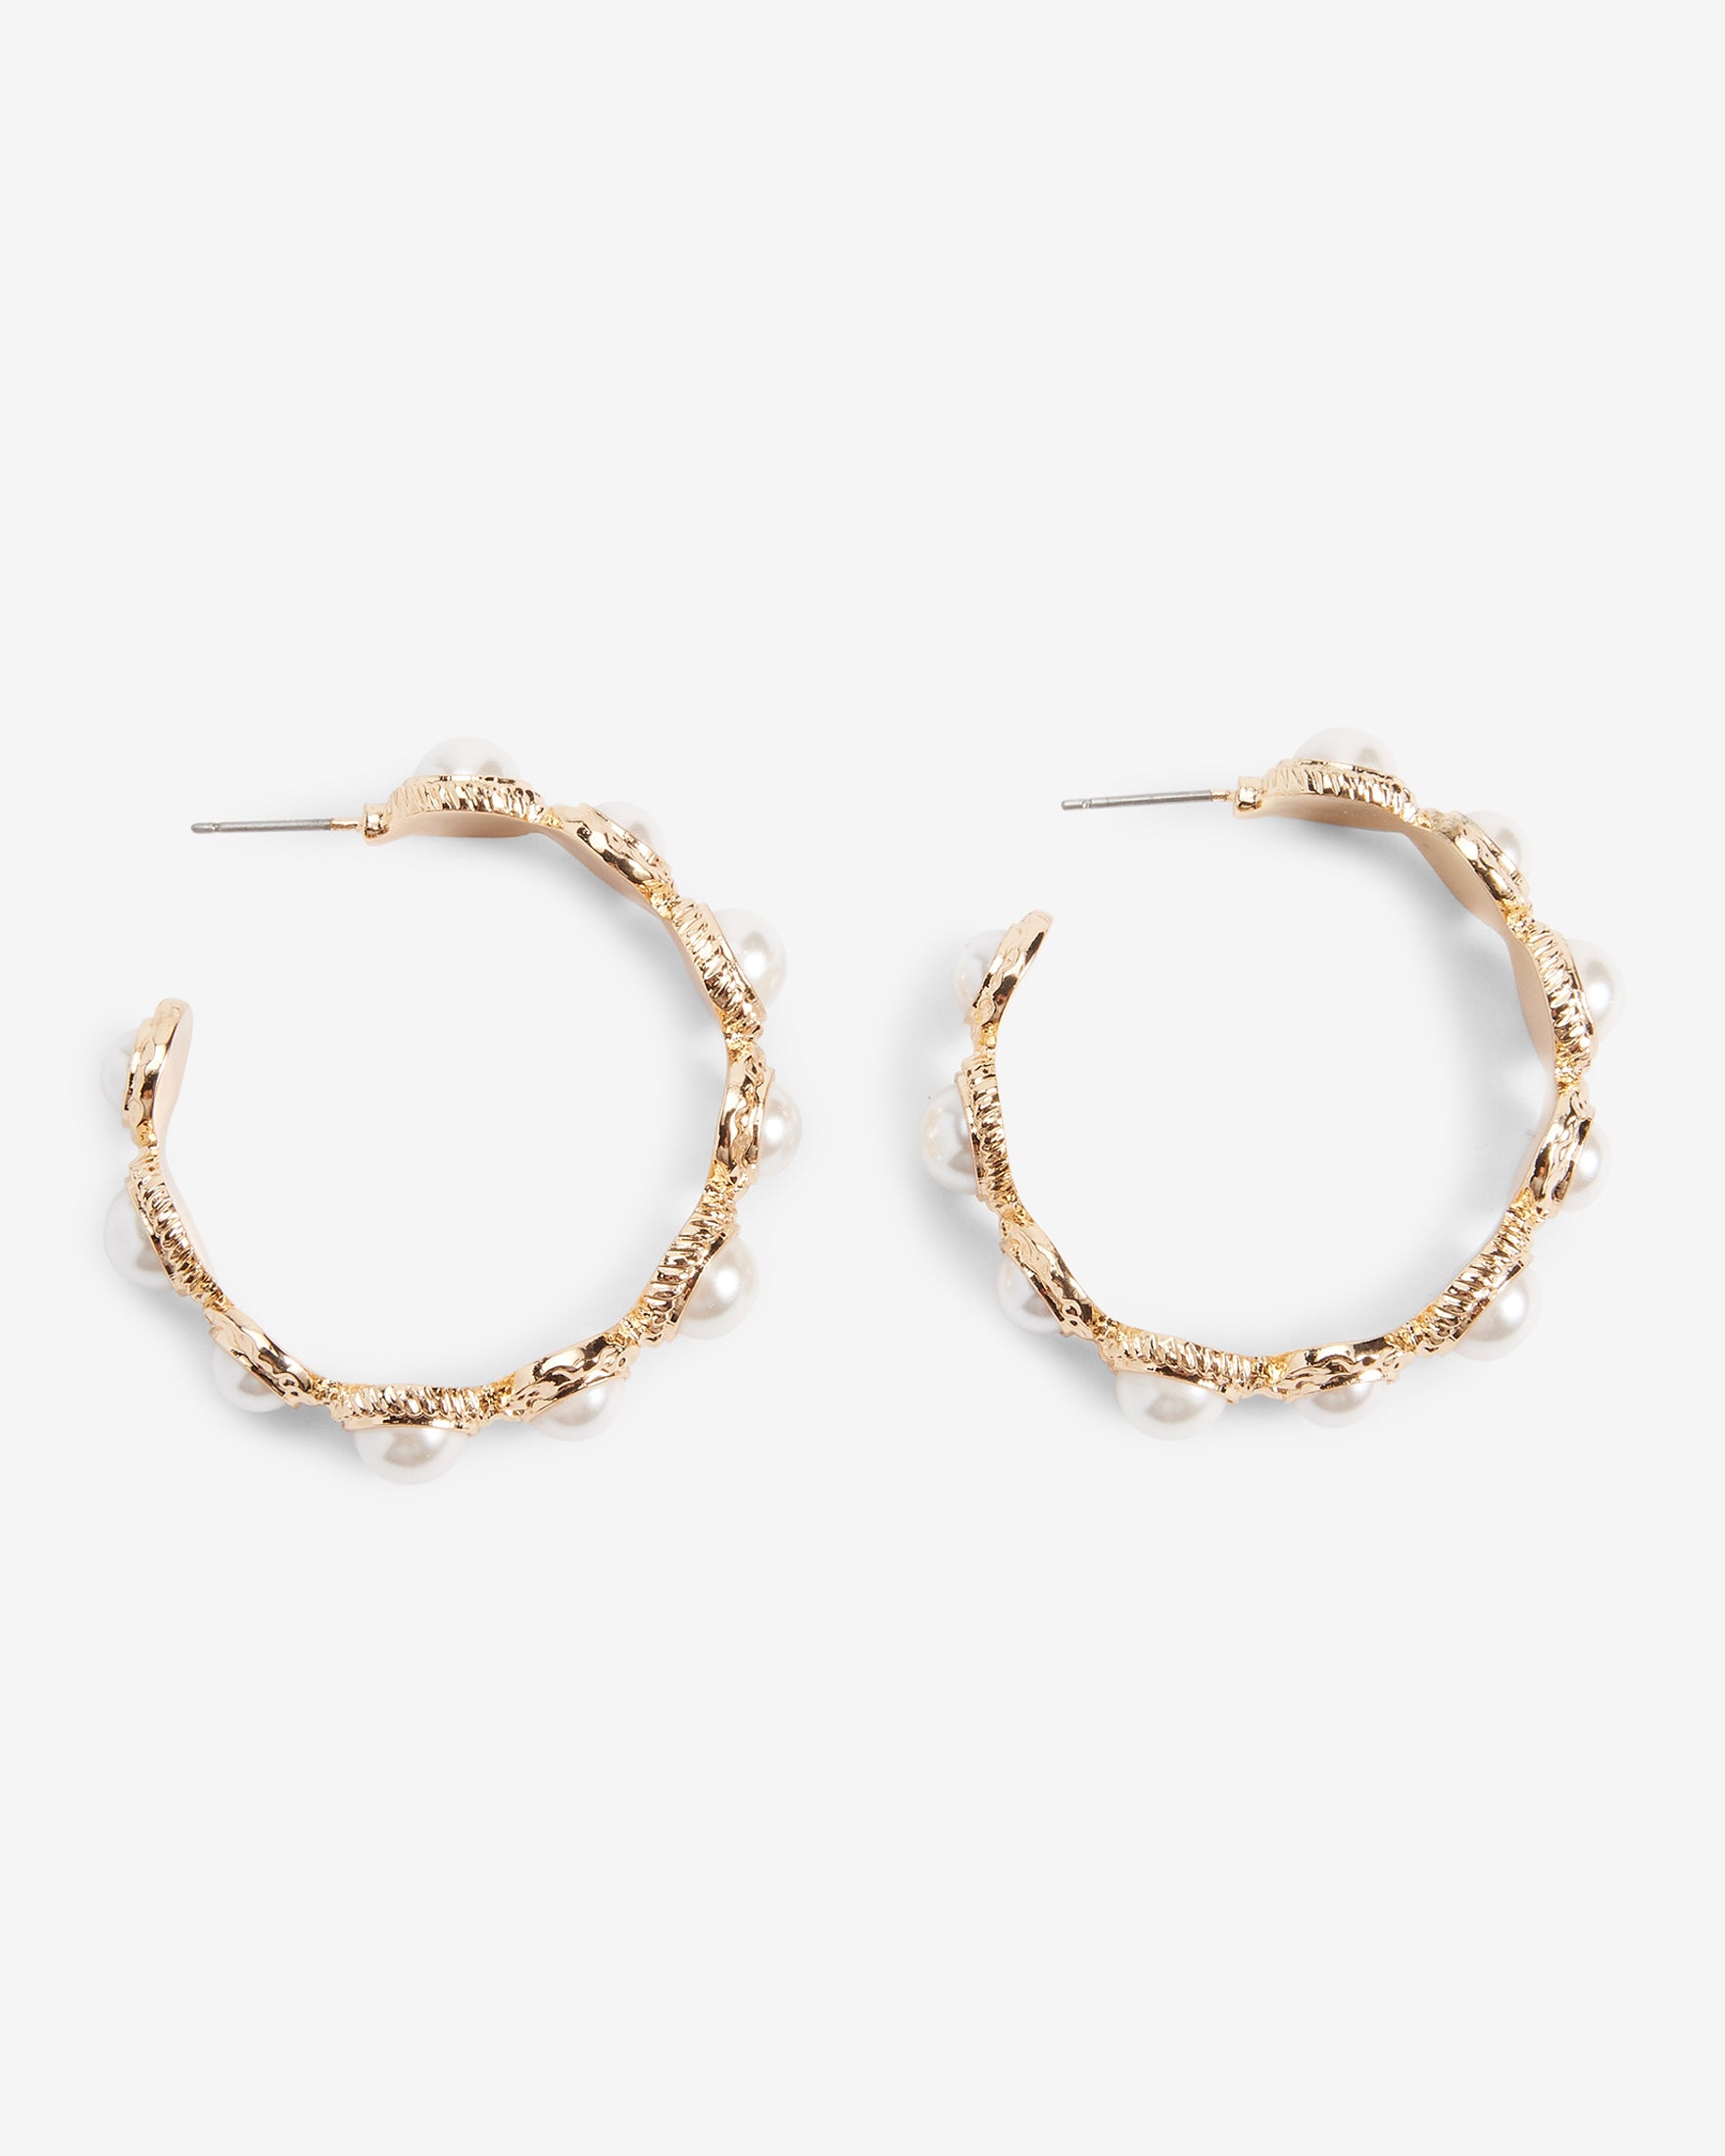 Gold hoop earrings surrounded by row of diamonds